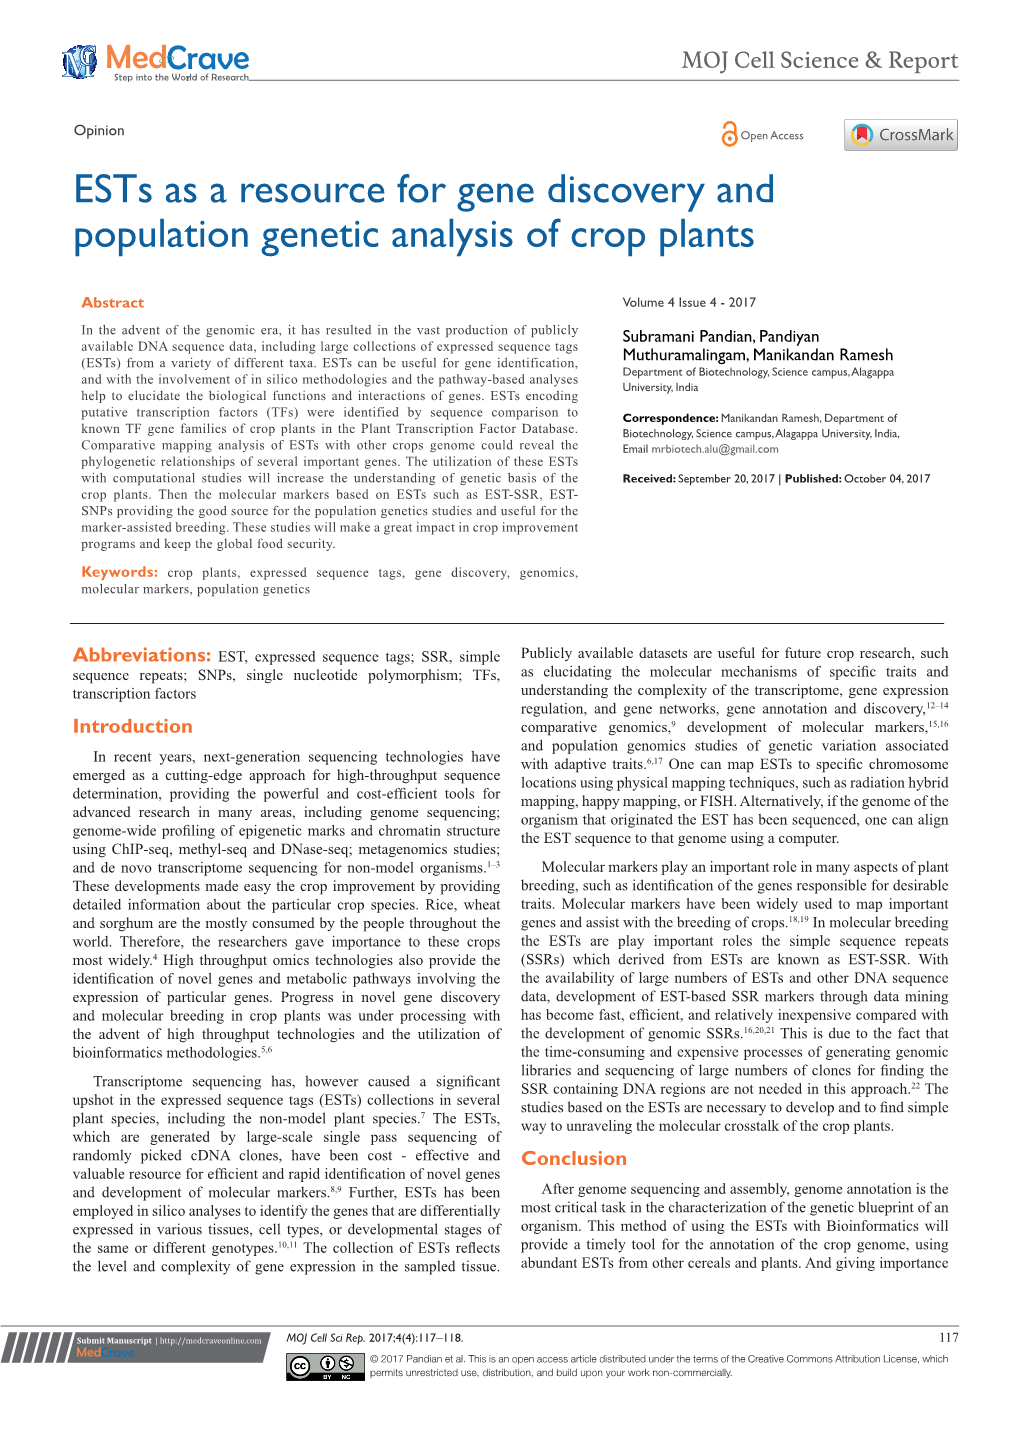 Ests As a Resource for Gene Discovery and Population Genetic Analysis of Crop Plants